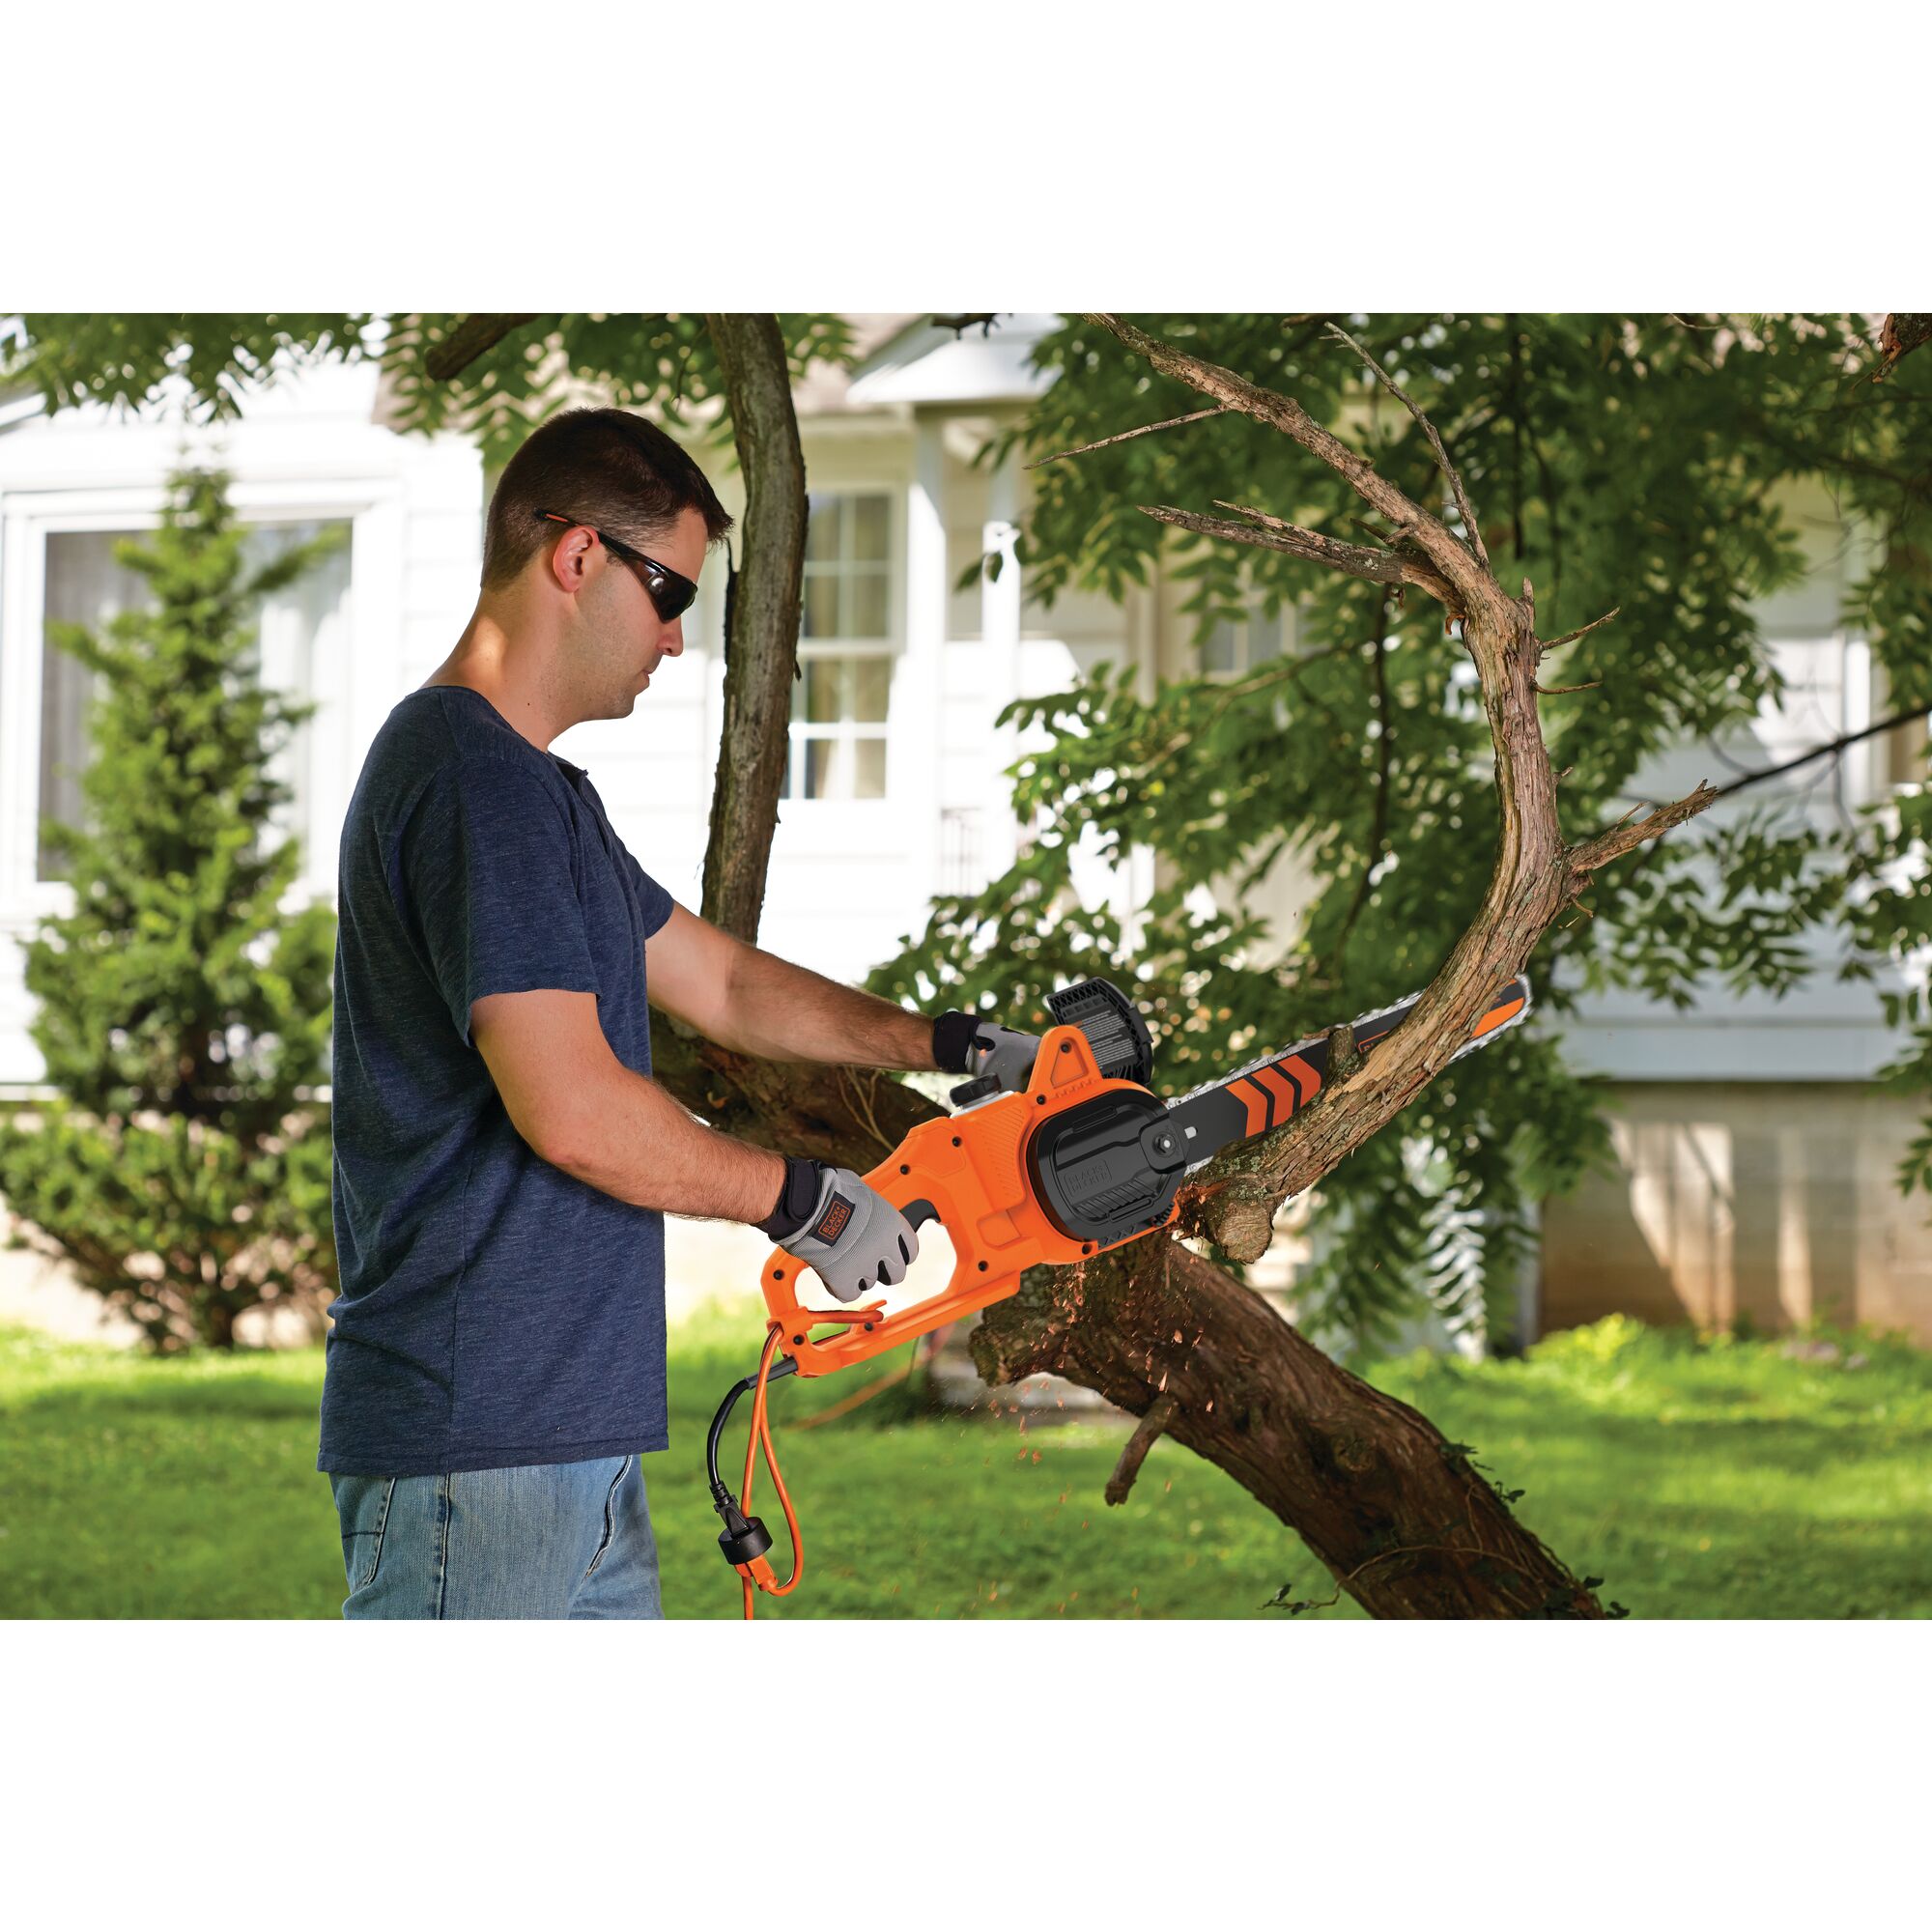 8 Ampere 14 inch Electric Chainsaw being used by person to cut tree branch outdoors.